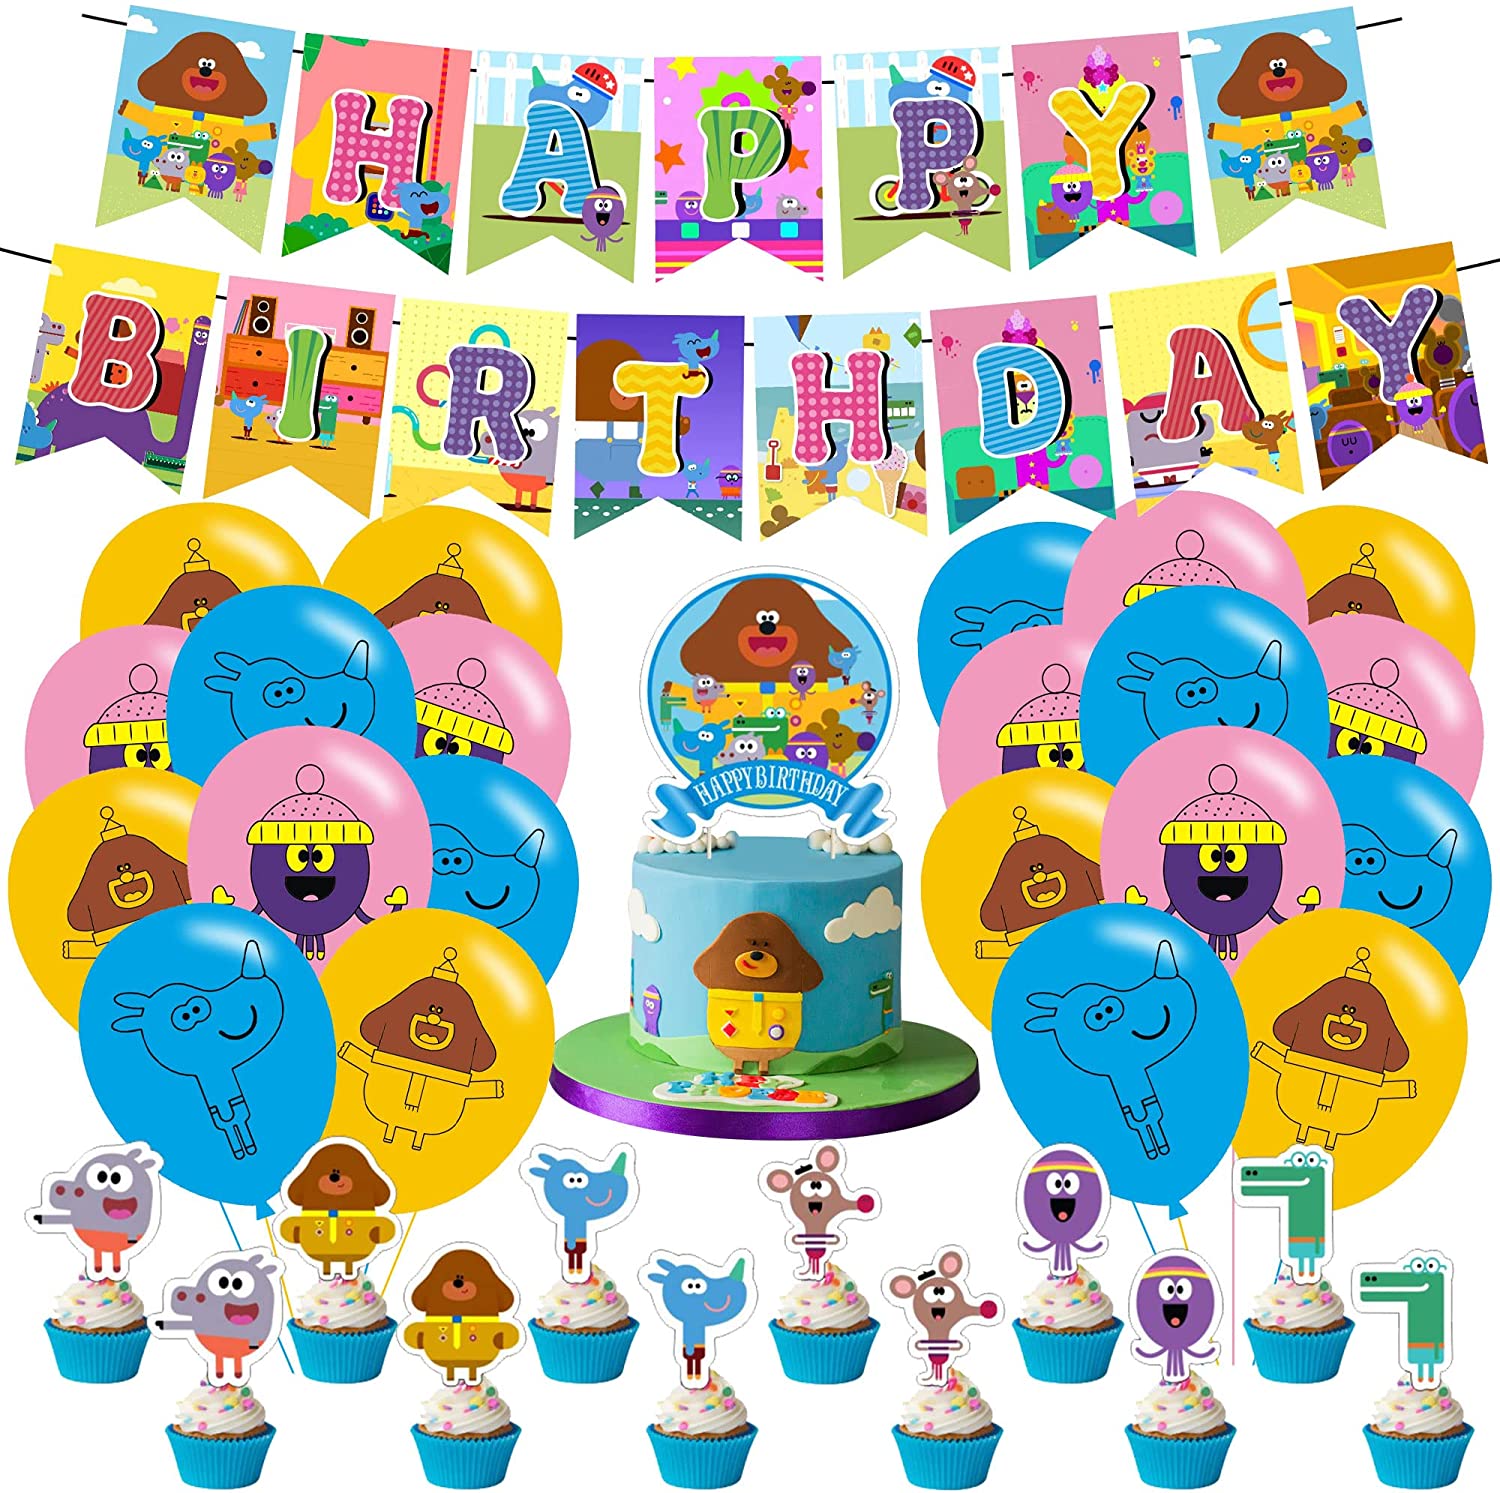 Hey Duggee Birthday Party Supplies,Decorations for Hey Duggee Includes Cake Topper Cupcake Toppers,Banner,Ballons for Birthday Party Supplies Decorations